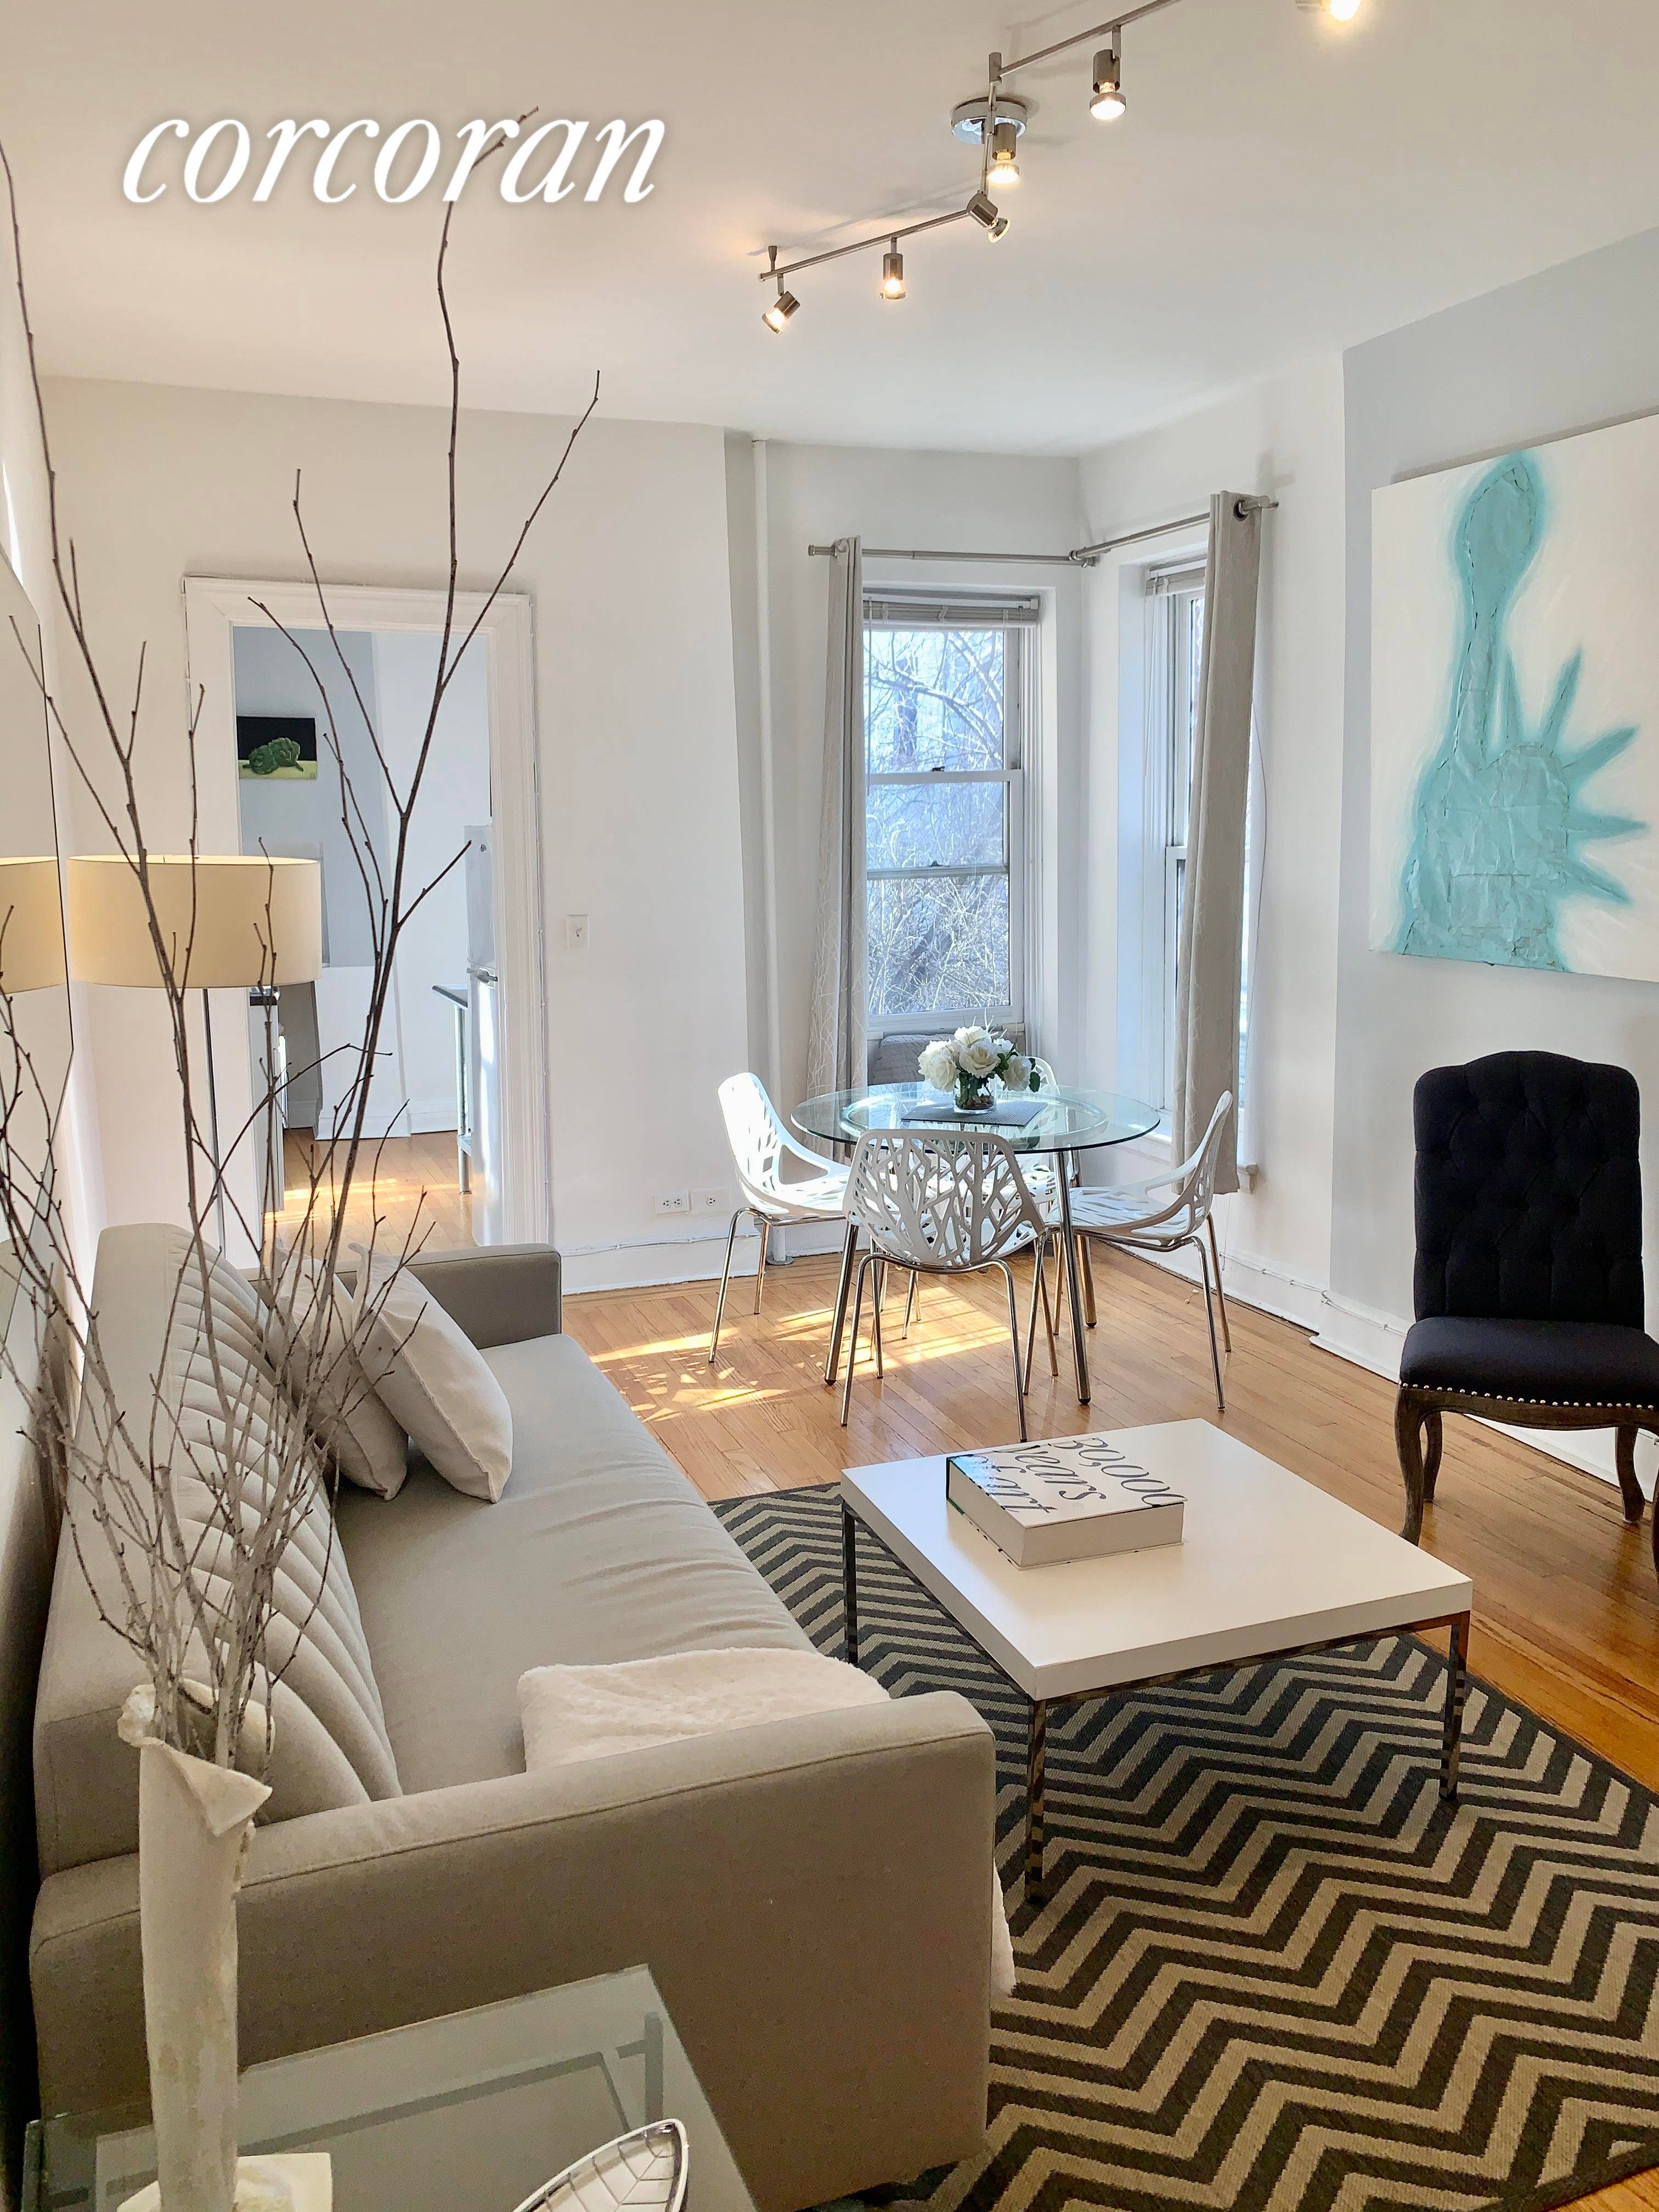 GET READY TO FALL IN LOVE with this modern and elegant 2 Bedroom 1 bath luxury FURNISHED apartment in the heart of Brooklyn Heights' historic neighborhood.